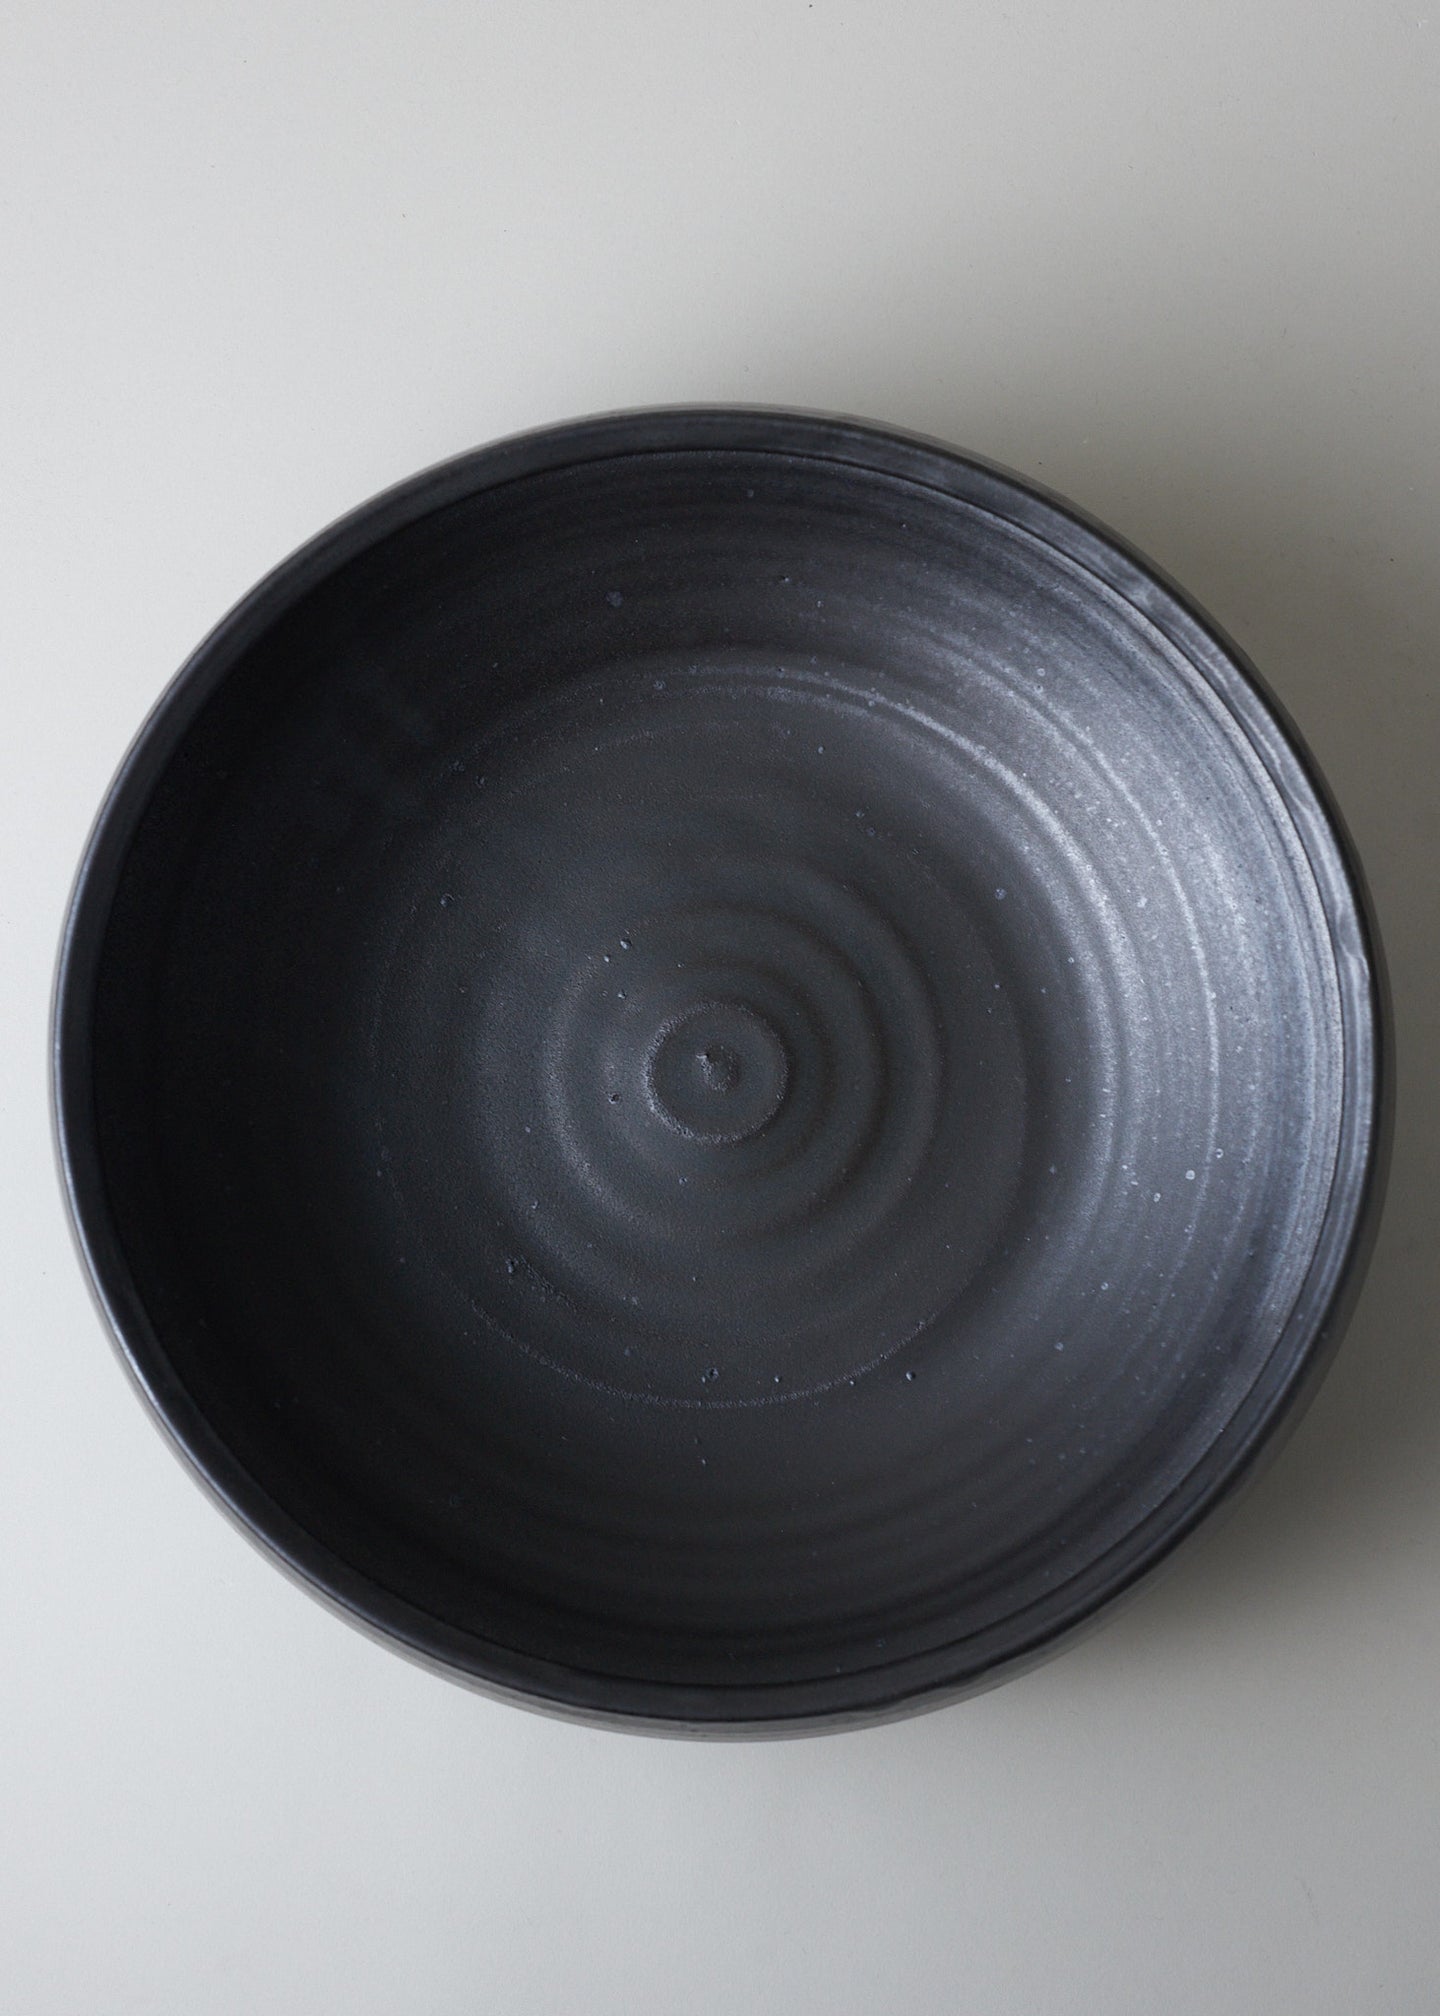 Large Architectural Bowl in Iron Black - Victoria Morris Pottery